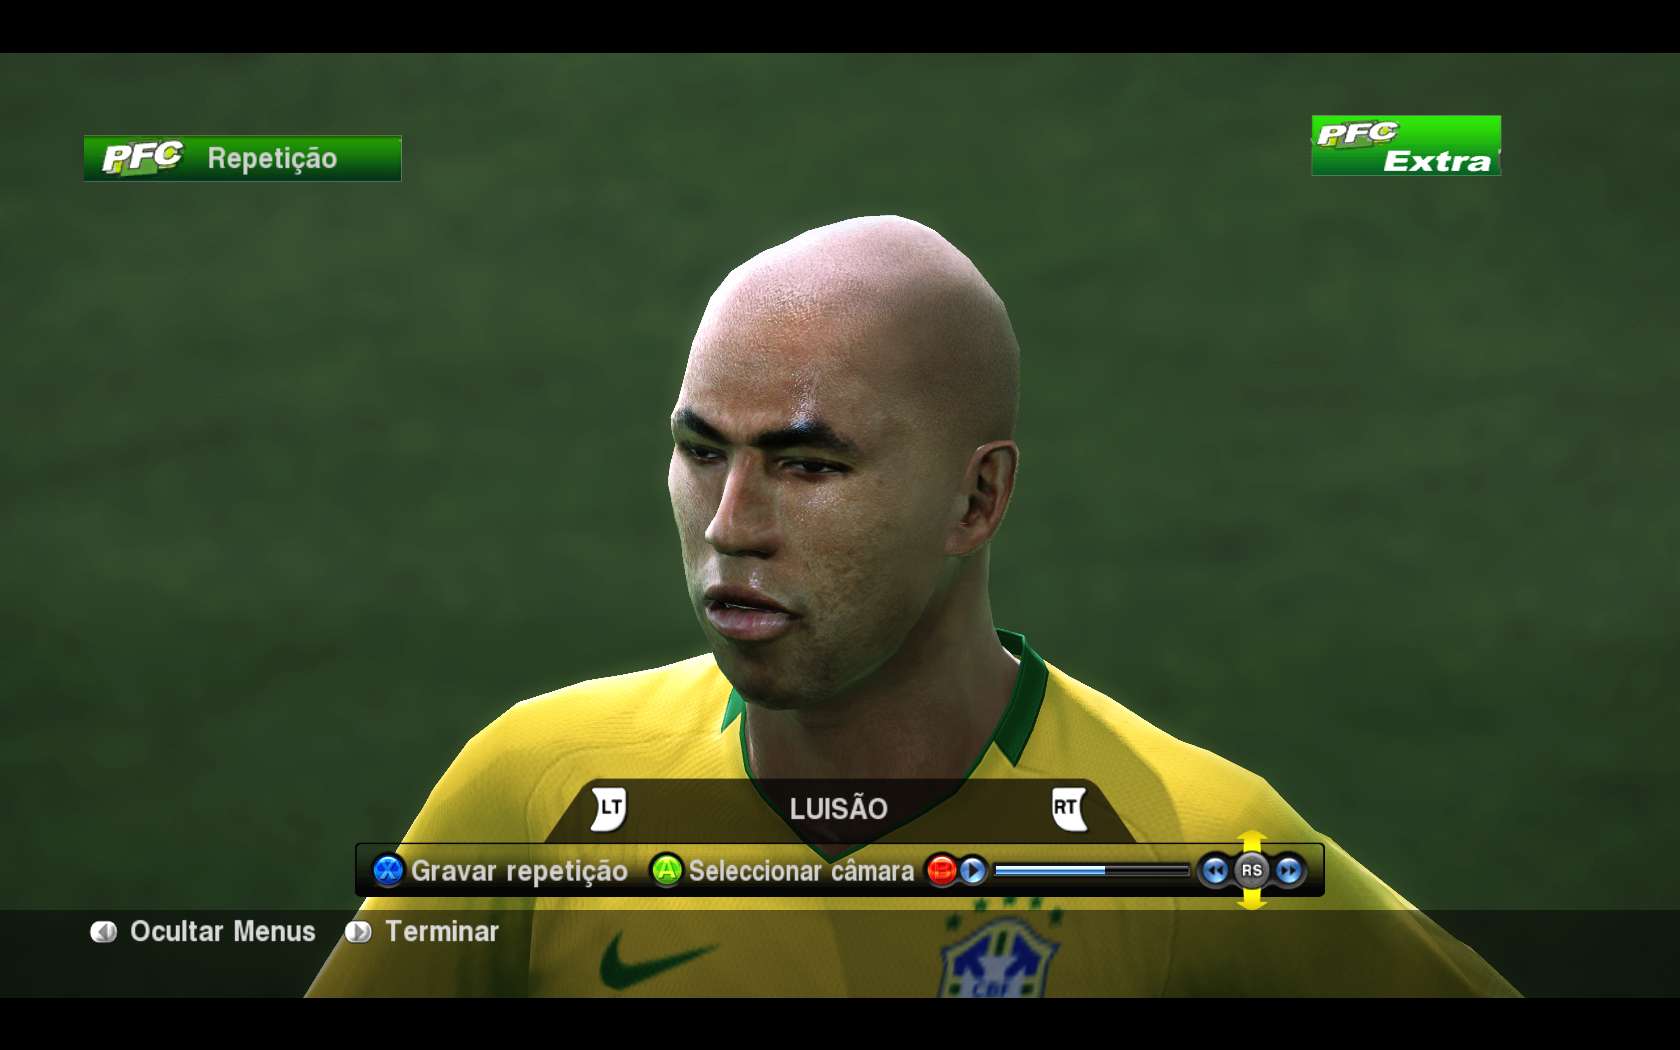 Pes 2010 full version download for pc